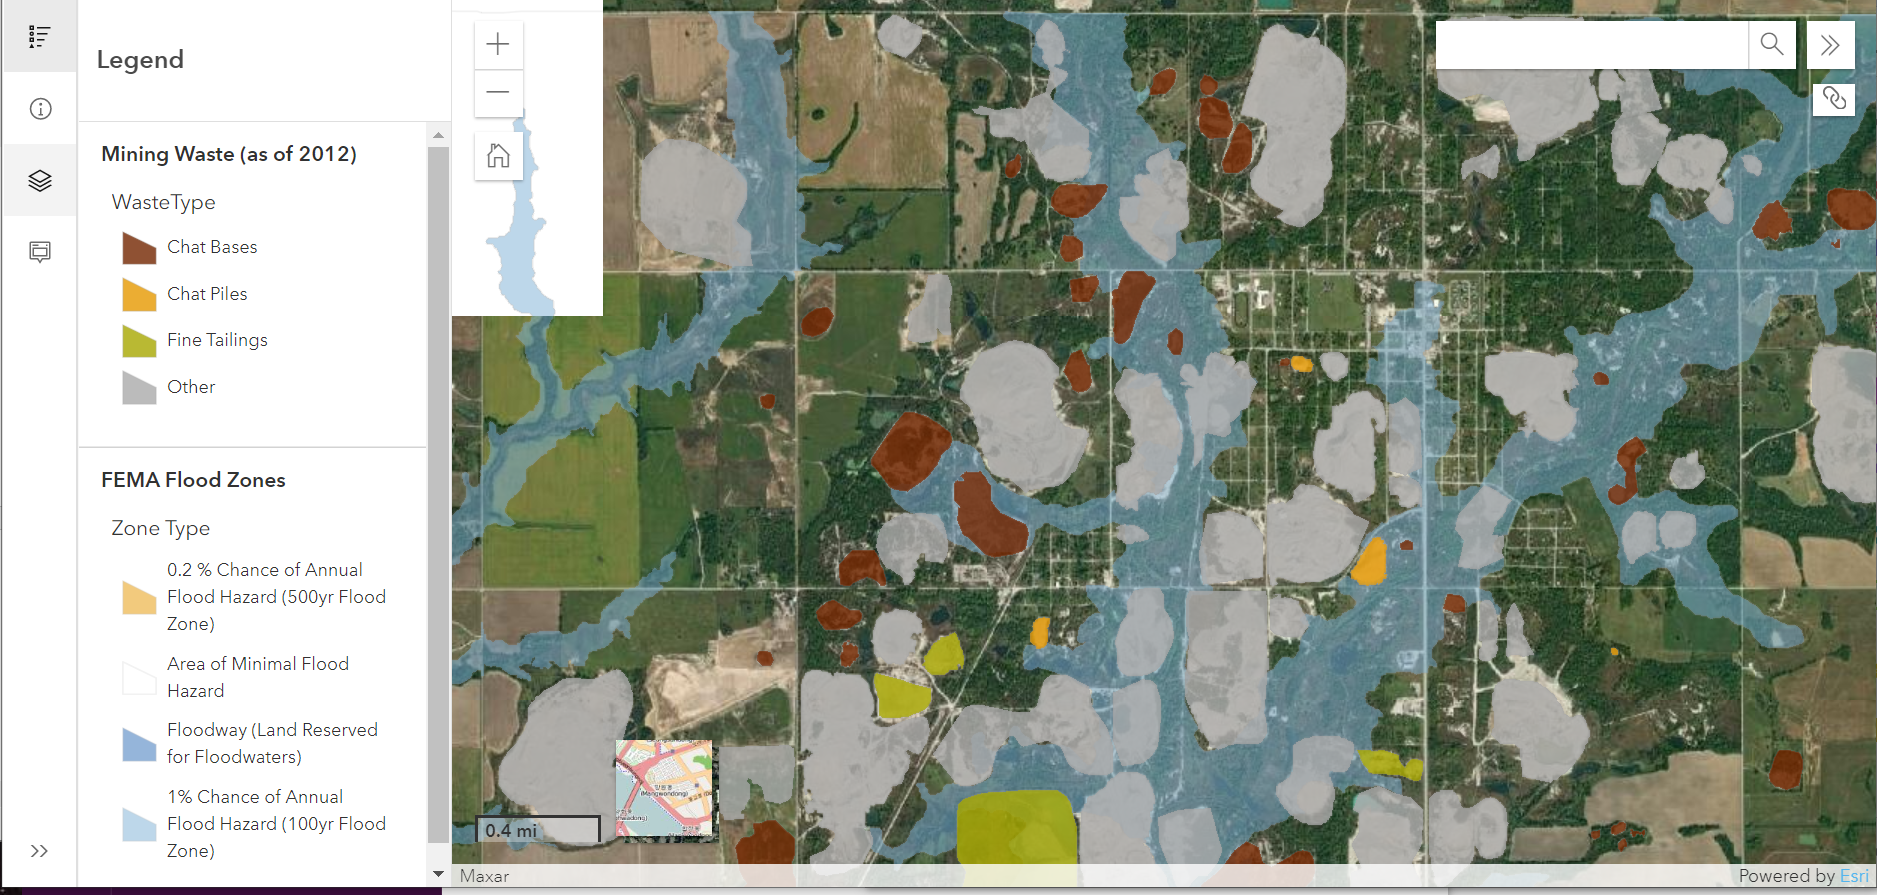 Screenshot of GIS map created by the project. On the left is a legend and menu to select layers.